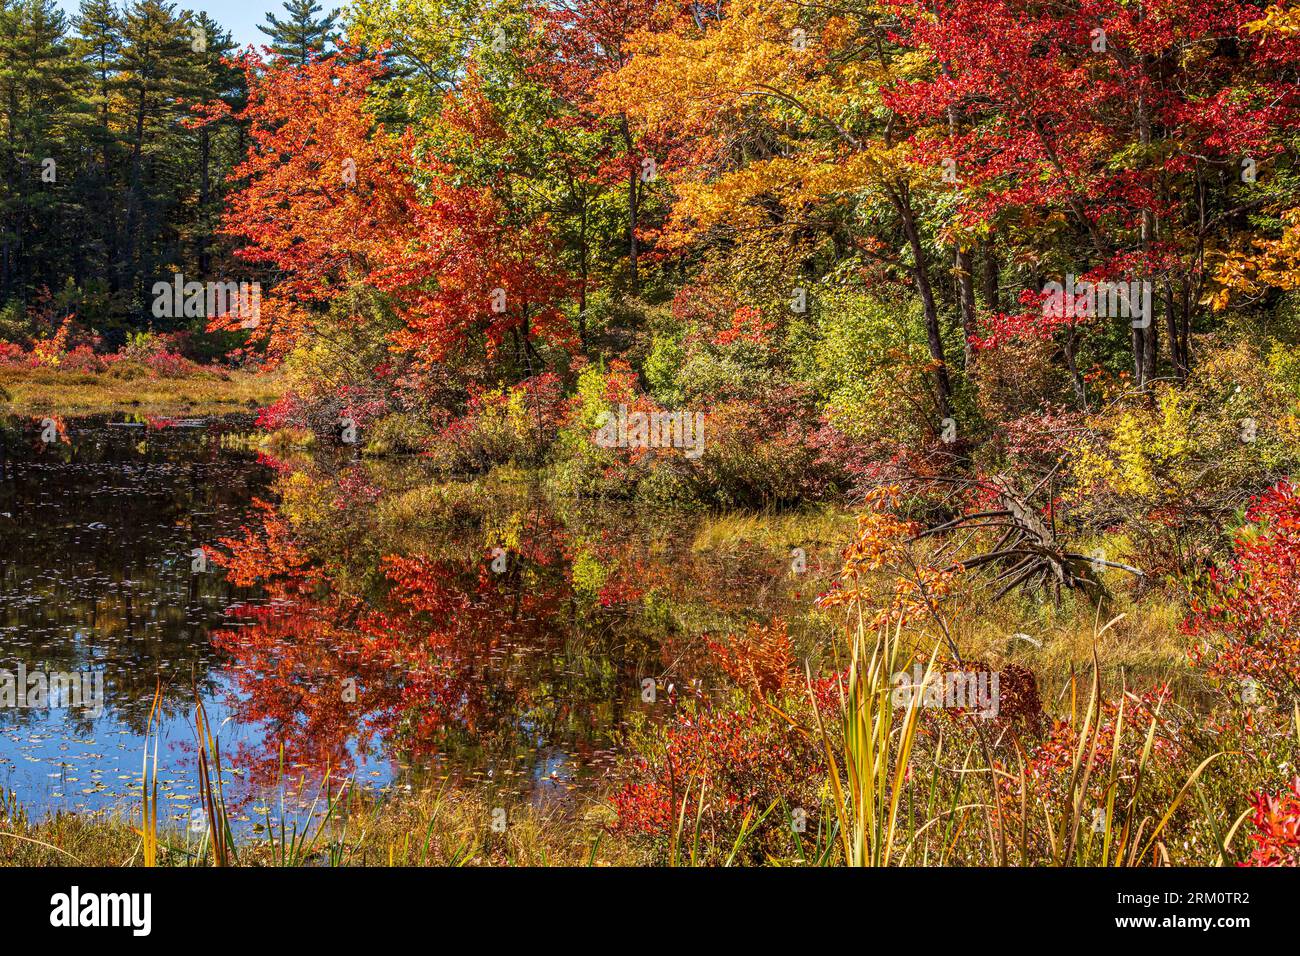 Autumn landscape in a small rural New England town Stock Photo